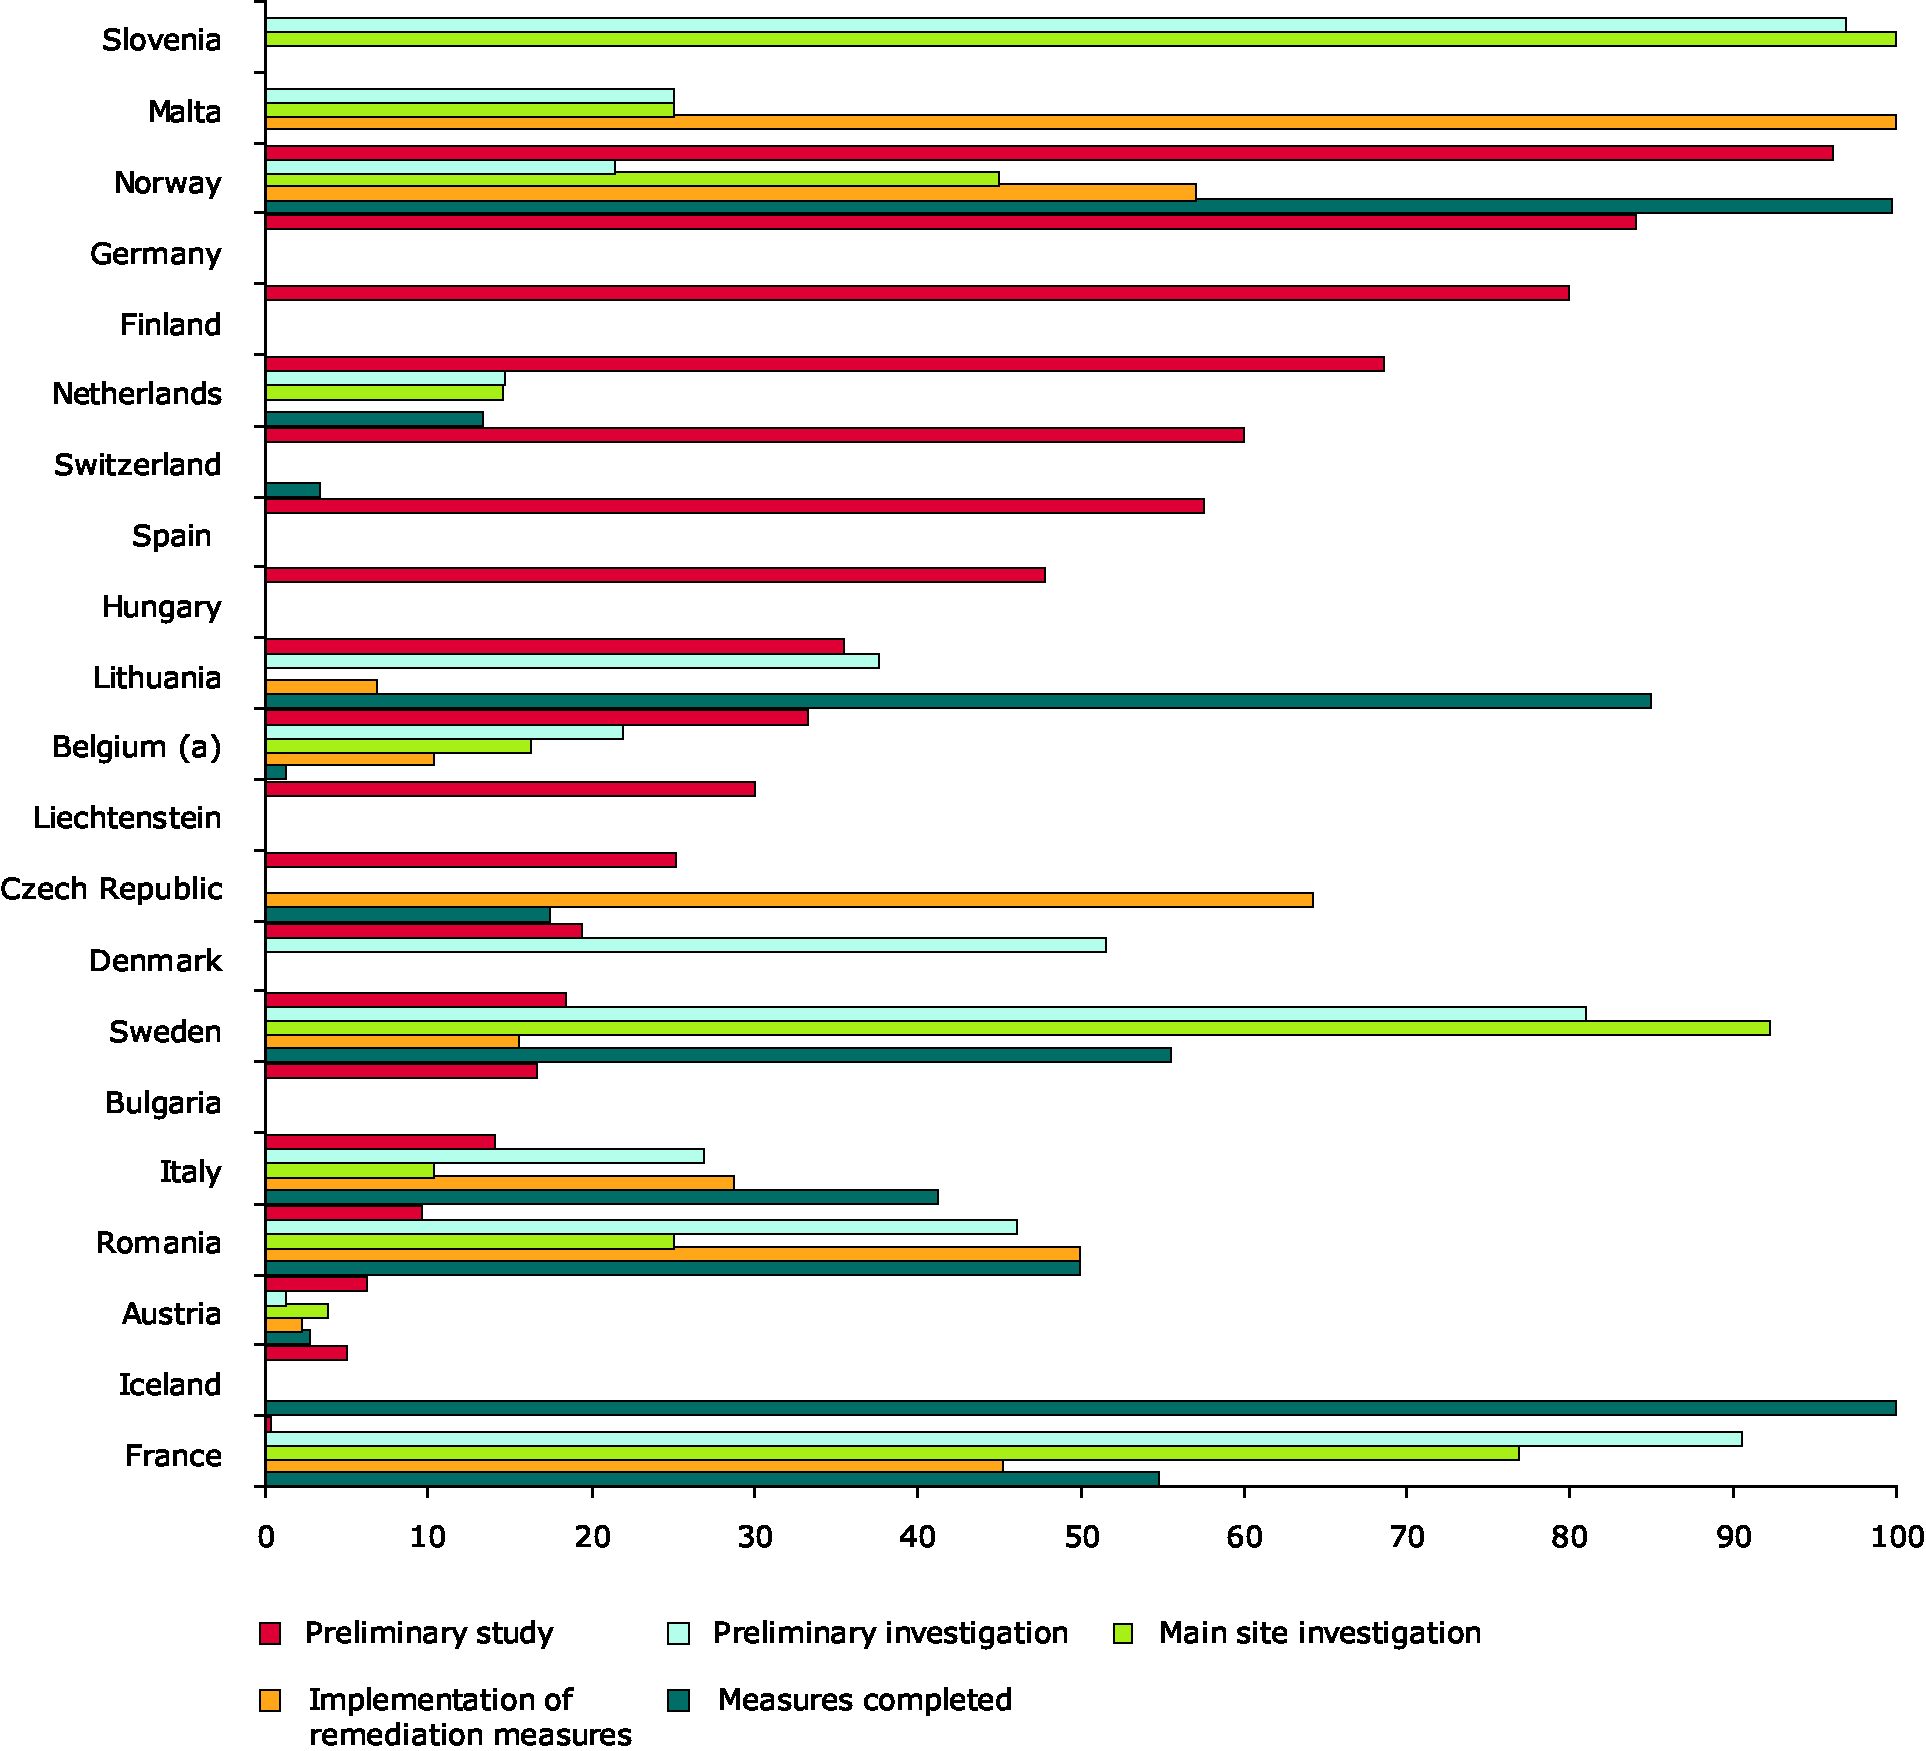 Overview of progress in control and remediation of soil contamination by country